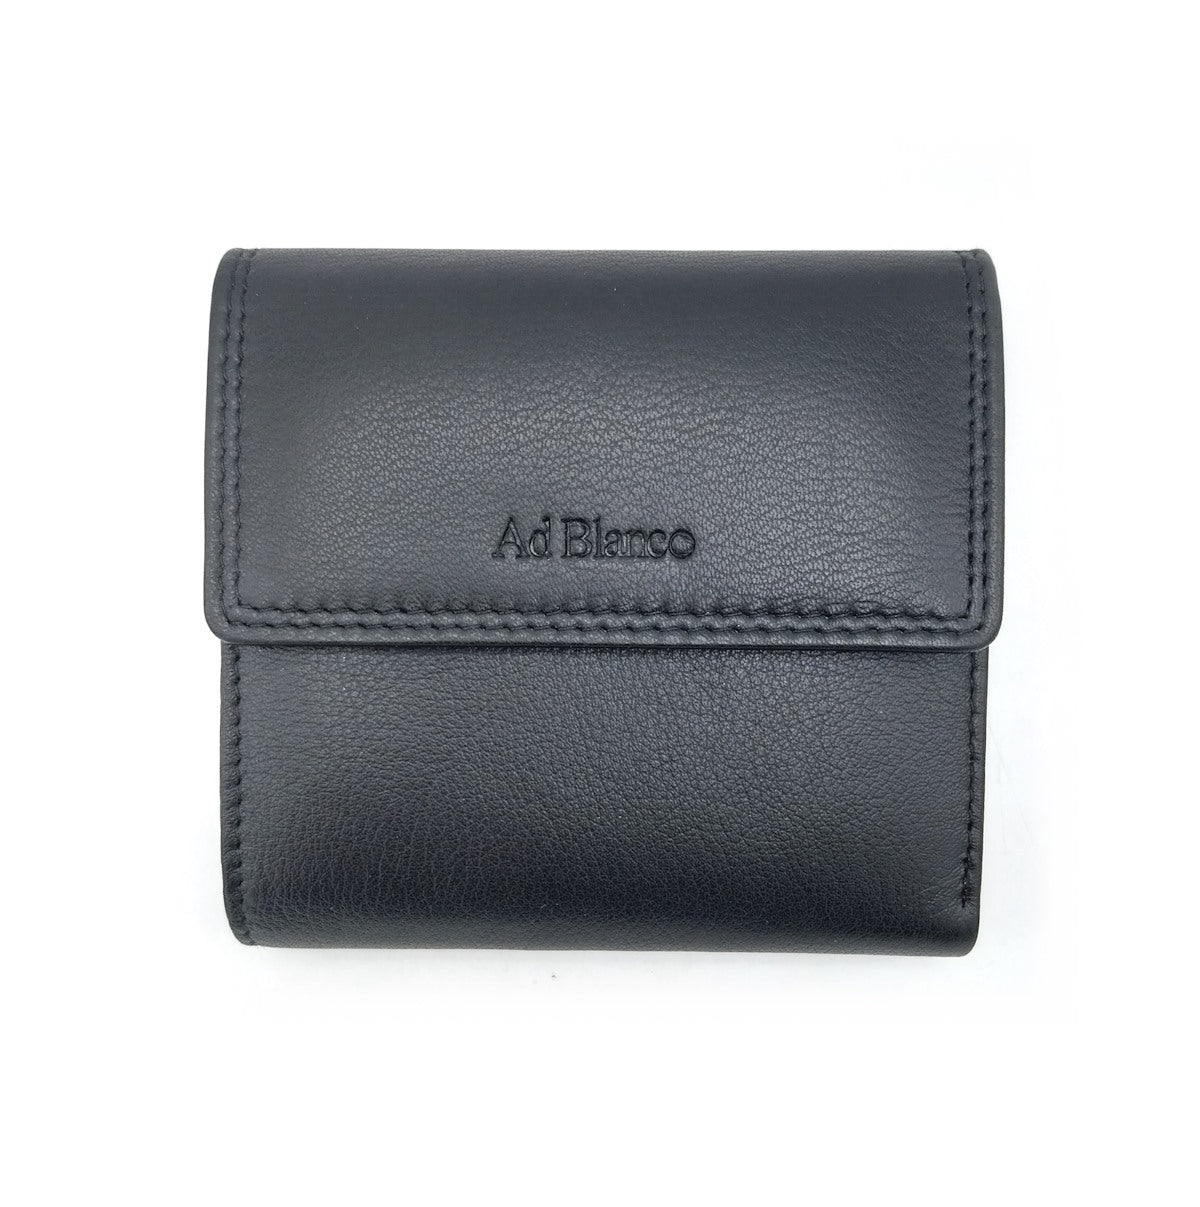 Genuine leather wallet, Ad Blanco, art. 4781.422